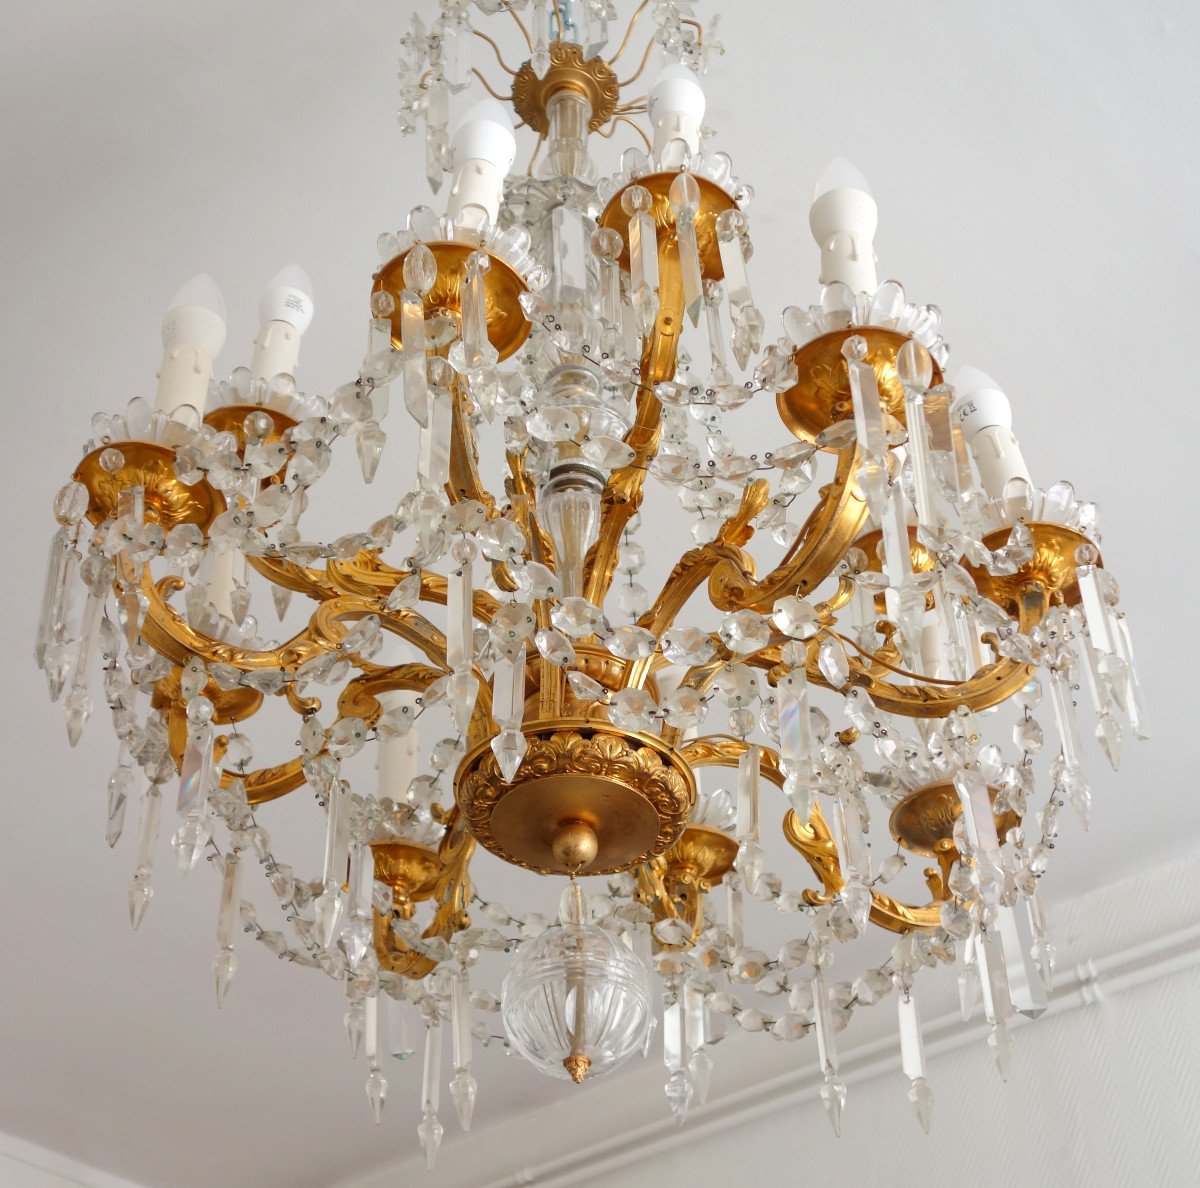 Baccarat - Chandelier 10 Lights In Chased Bronze And Gilded With Fine Gold - Late 19th Century-photo-1